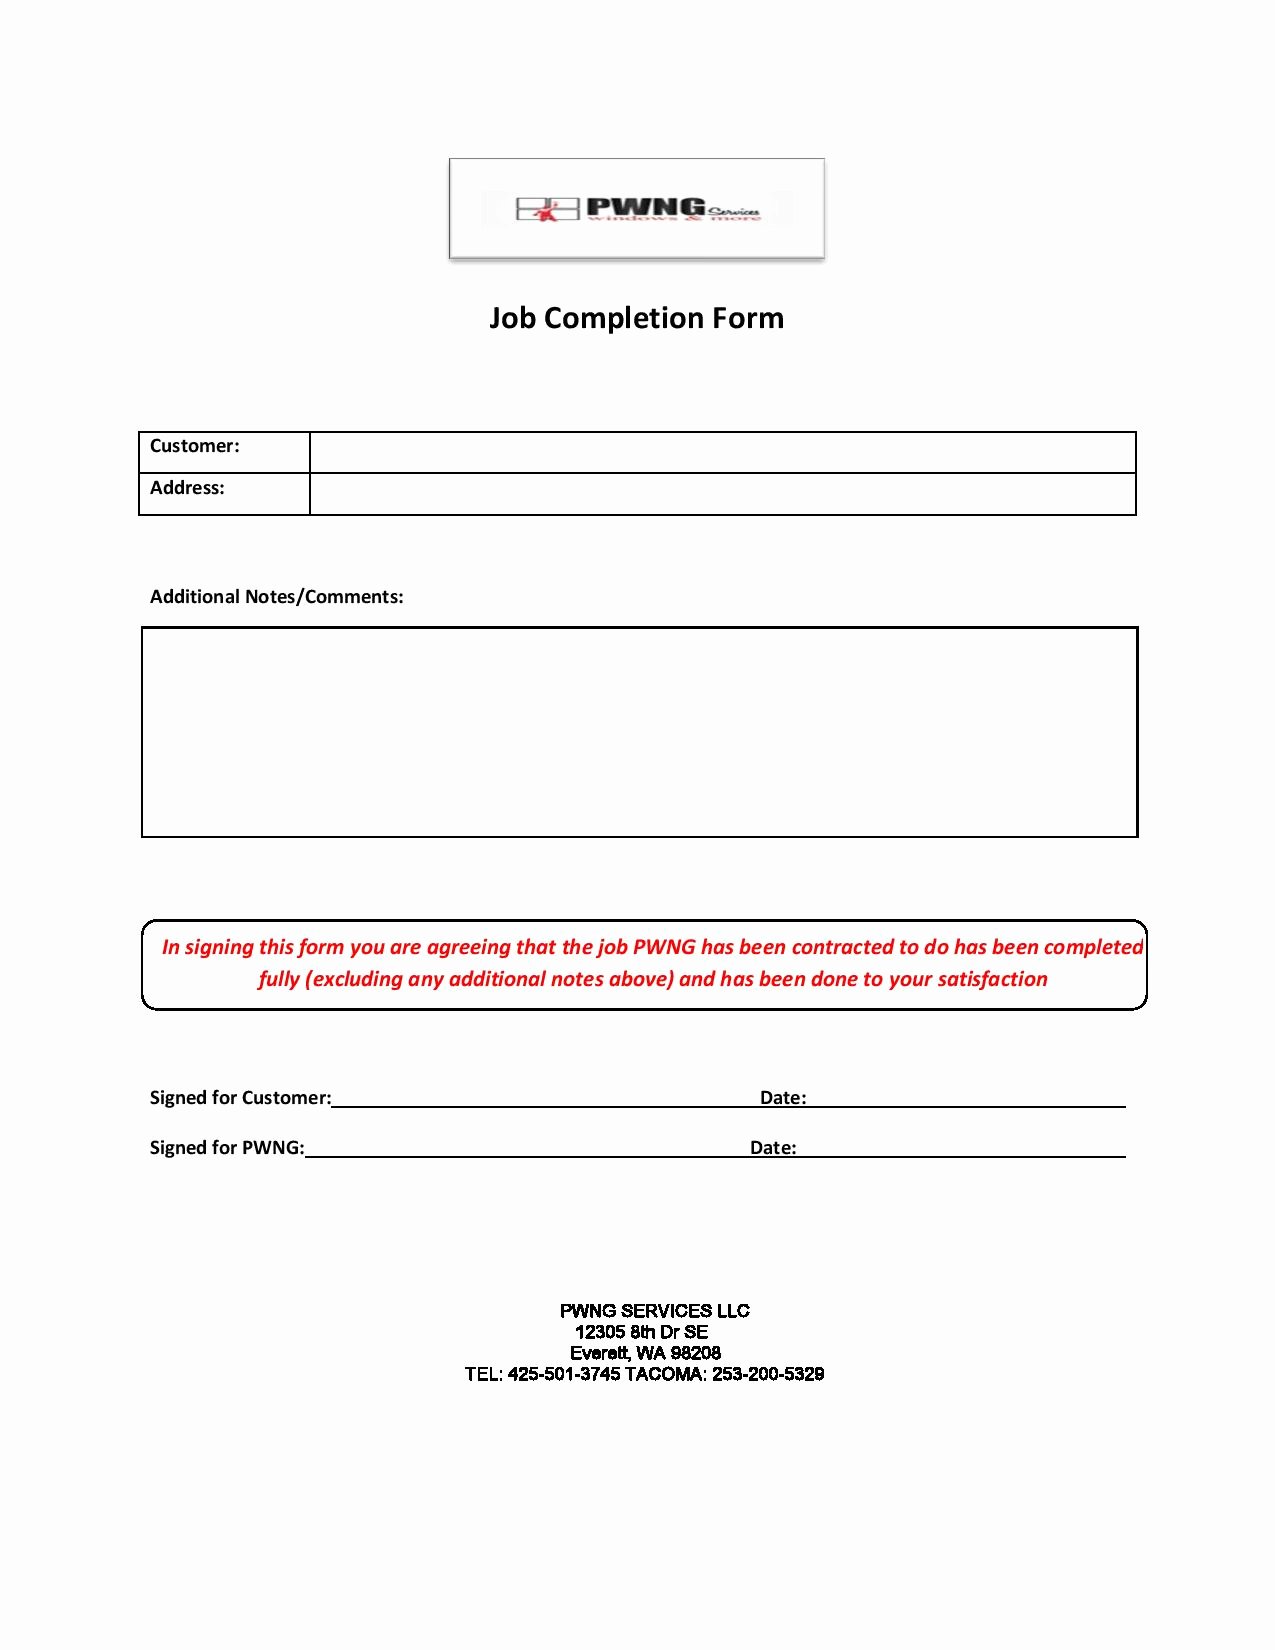 Construction Job Completion Sign Off form Lovely Index Of Wp Content 2014 12